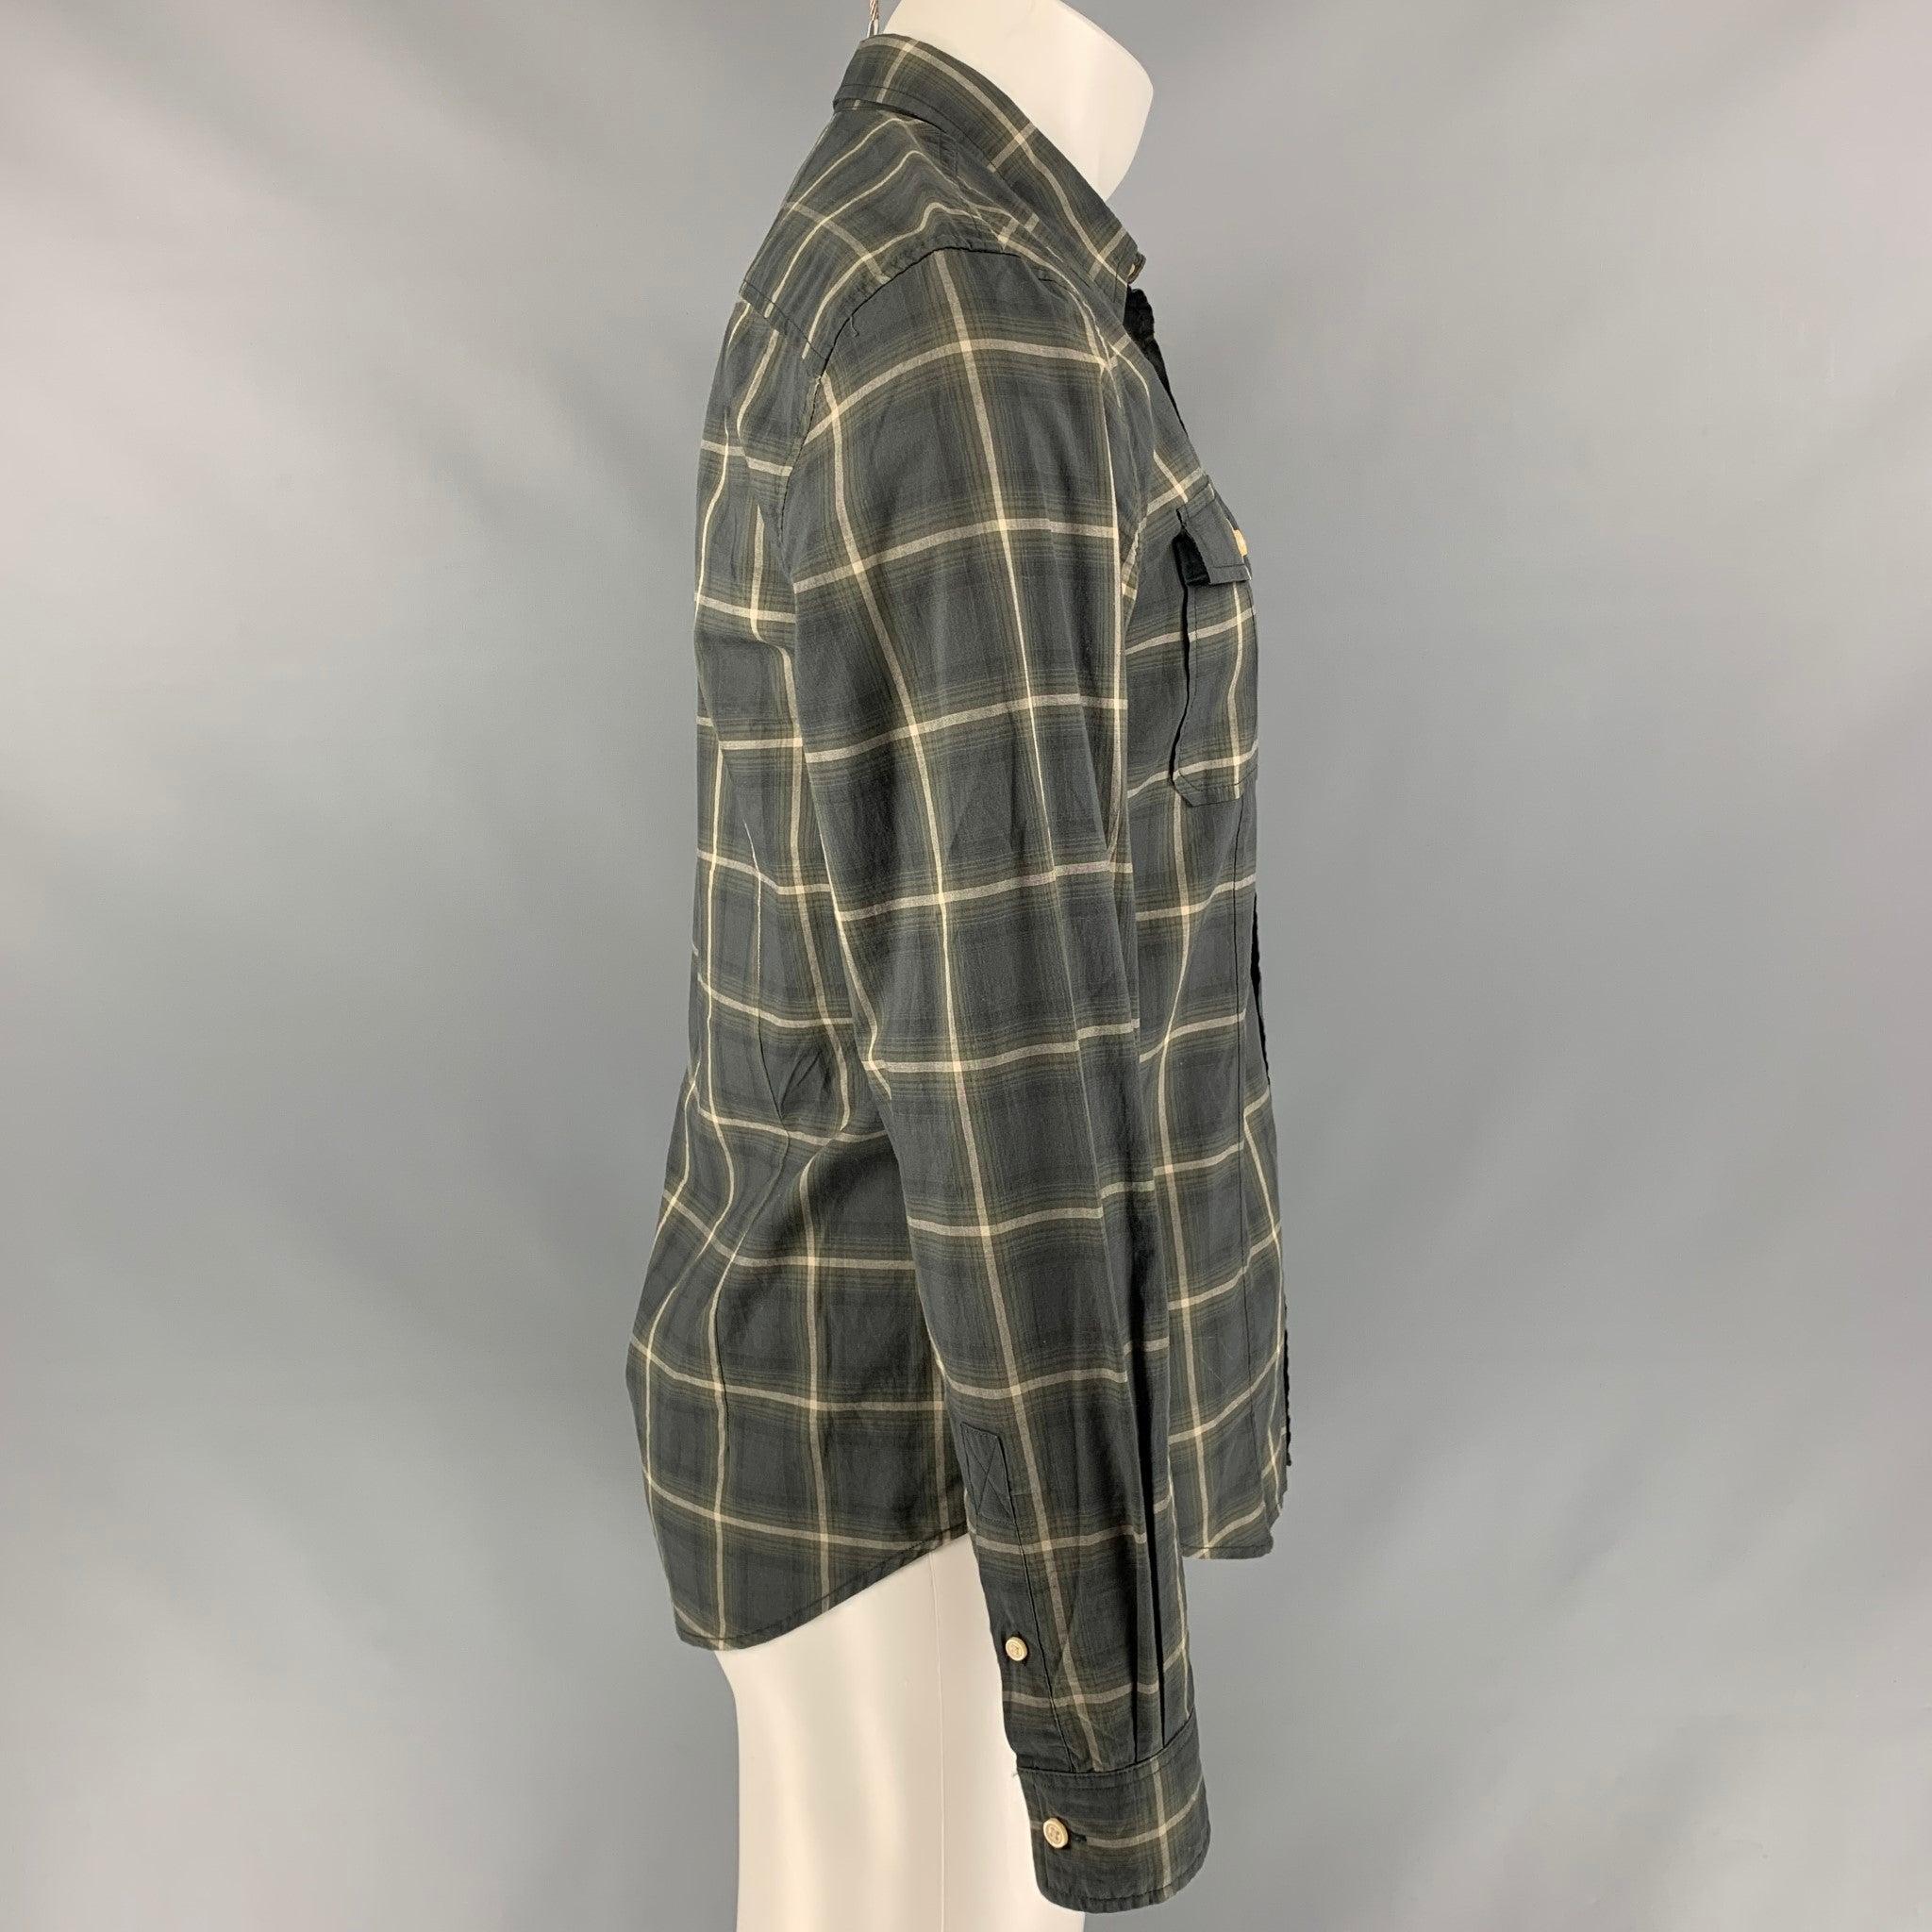 JOHN VARVATOS long sleeve shirt comes in green and grey plaid cotton featuring a straight collar, patch pockets, buttoned closure and one button square cuff. Excellent Pre-Owned Condition. 

Marked:   S 

Measurements: 
 
Shoulder: 18 inches Chest: